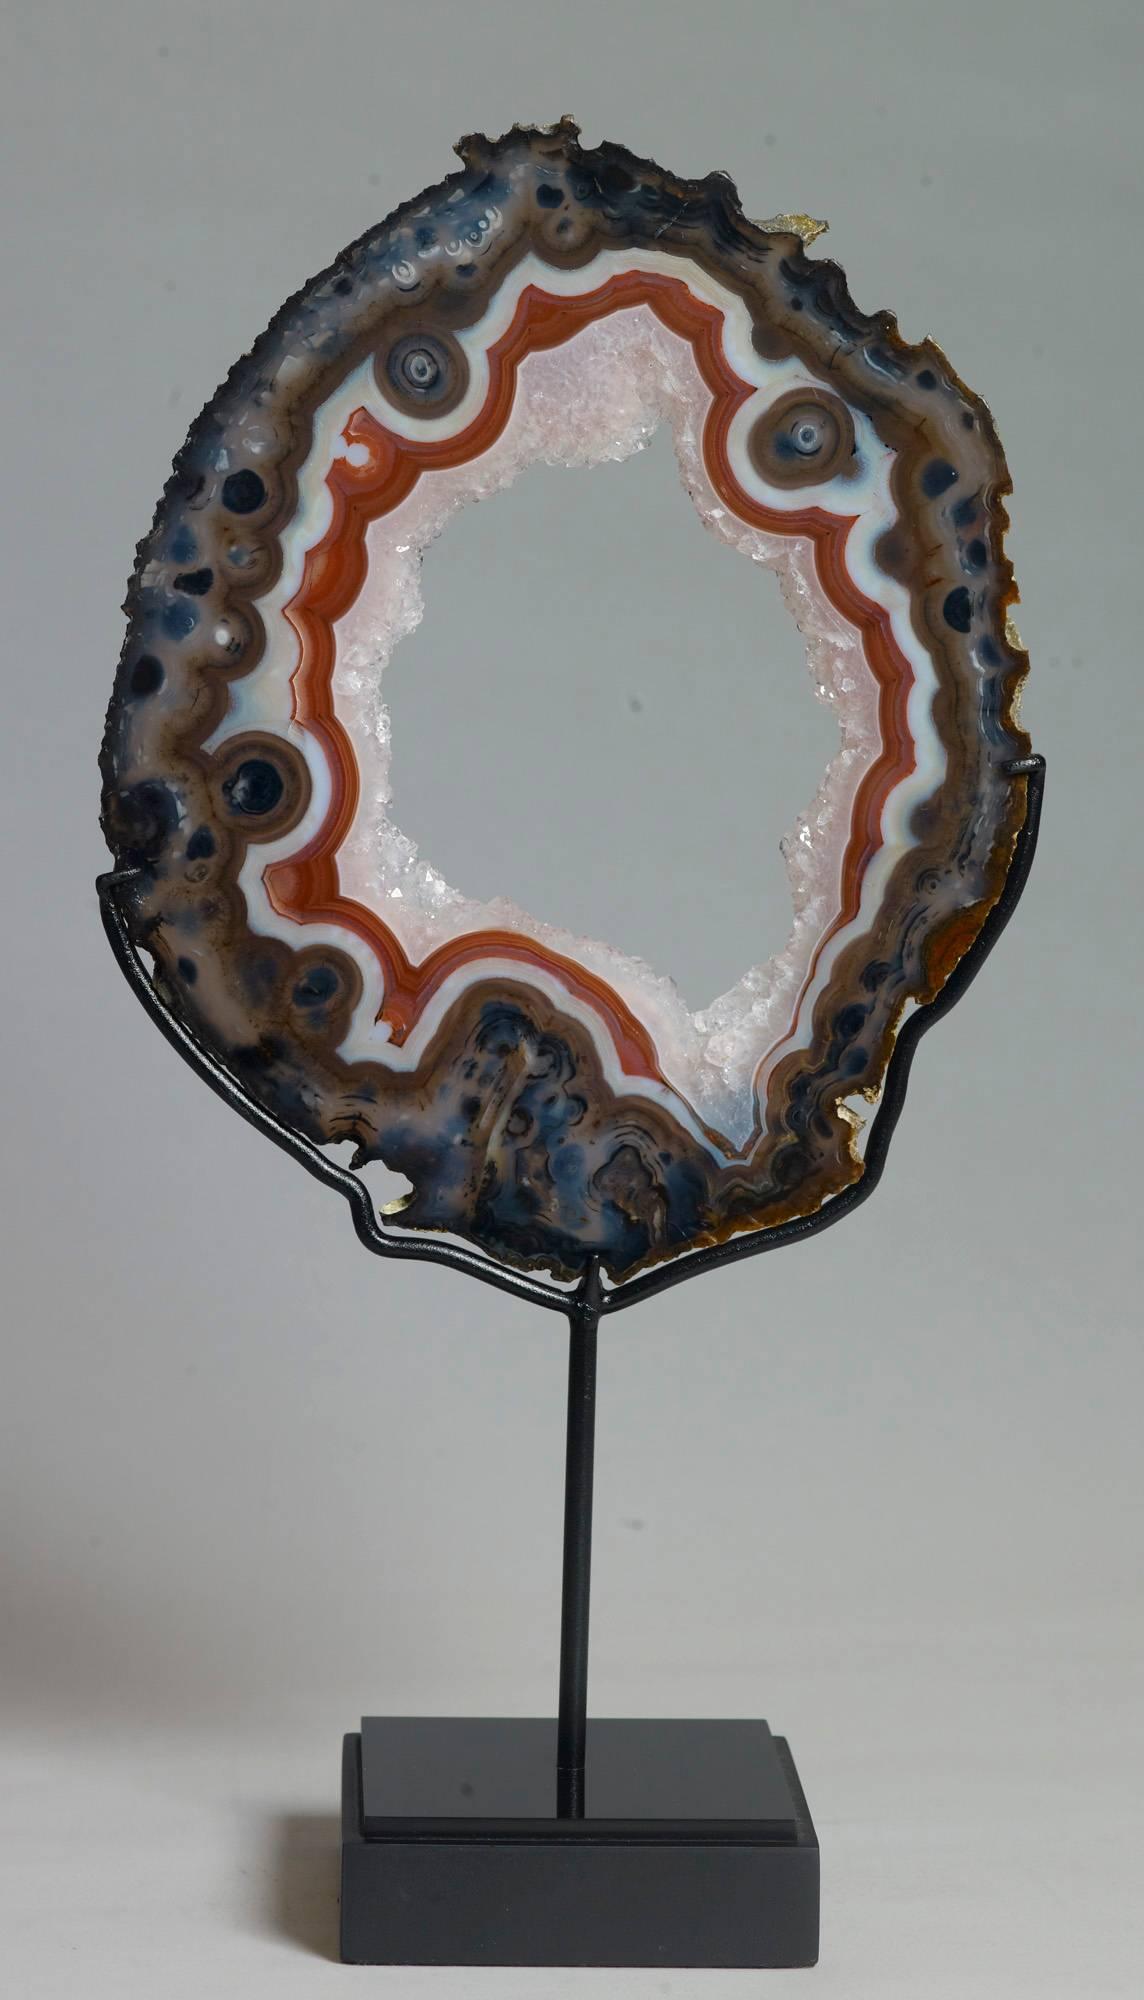 Very fine agate slice with a stunning red band and clear quartz crystals in the centre. Rio Grande do Sul, Brazil. Measures: 39 x 20 x 10 with stand.